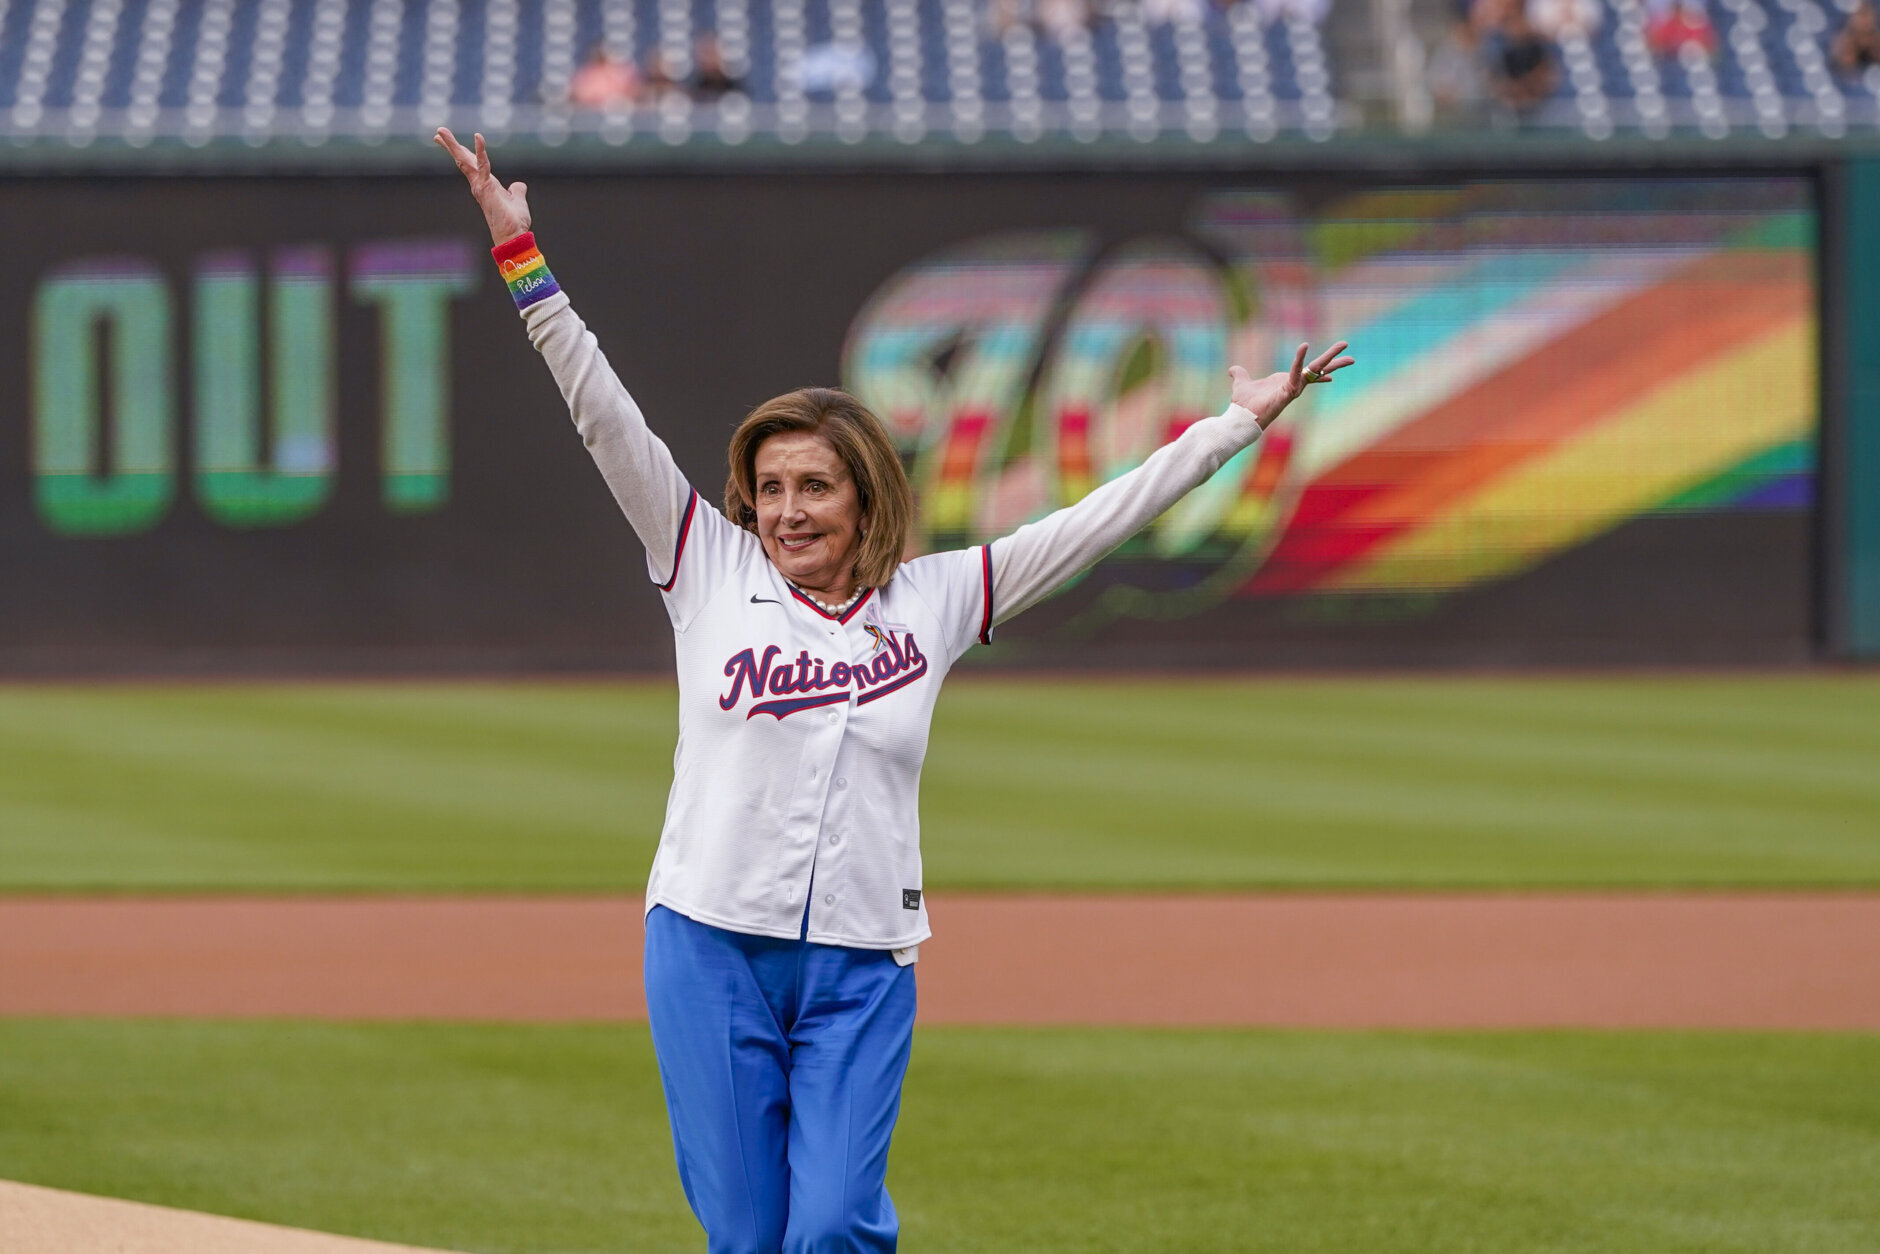 Rep. Nancy Pelosi, D-Calif., reacts after throwing out a ceremonial first pitch before a baseball game between the Washington Nationals and the Arizona Diamondbacks at Nationals Park, Tuesday, June 6, 2023, in Washington. The Nationals celebrated Pride month with their 18th Night OUT event. (AP Photo/Alex Brandon)